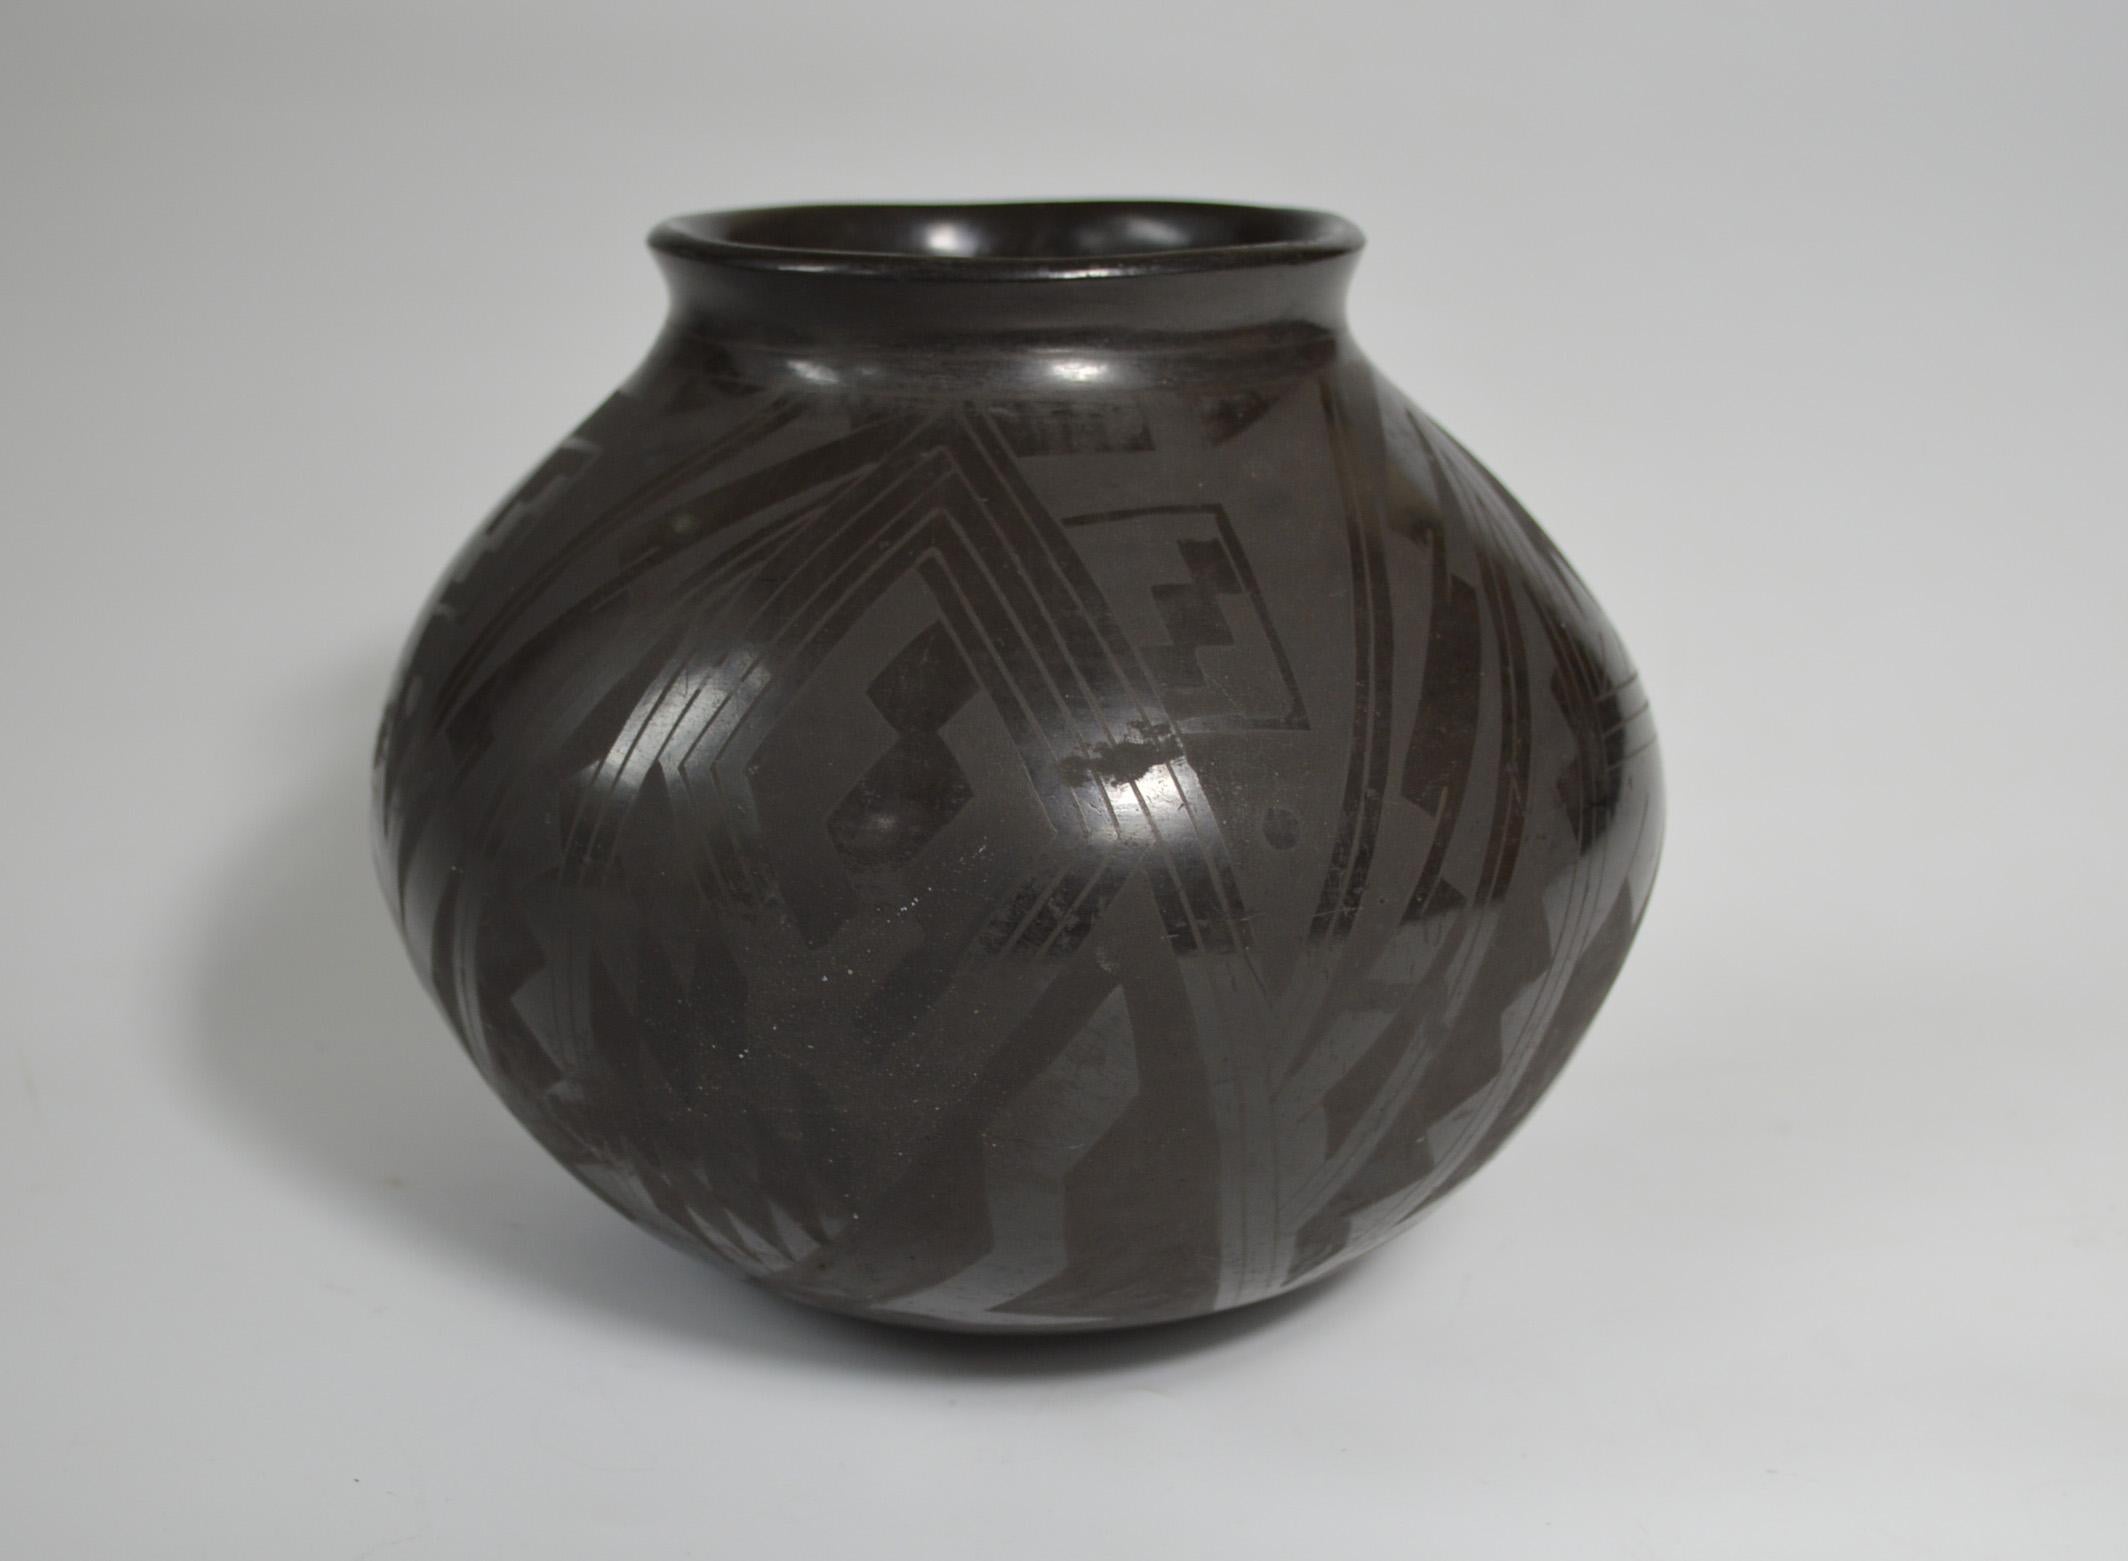 Fine Mata Ortiz Blackware pottery vase by the artist
David Ortiz

A superb black on black pottery vase with eye dazzling design makes a great piece for interior design or collector’s item

Signed David Ortiz

Measures: Height 6 inches 15 cm,